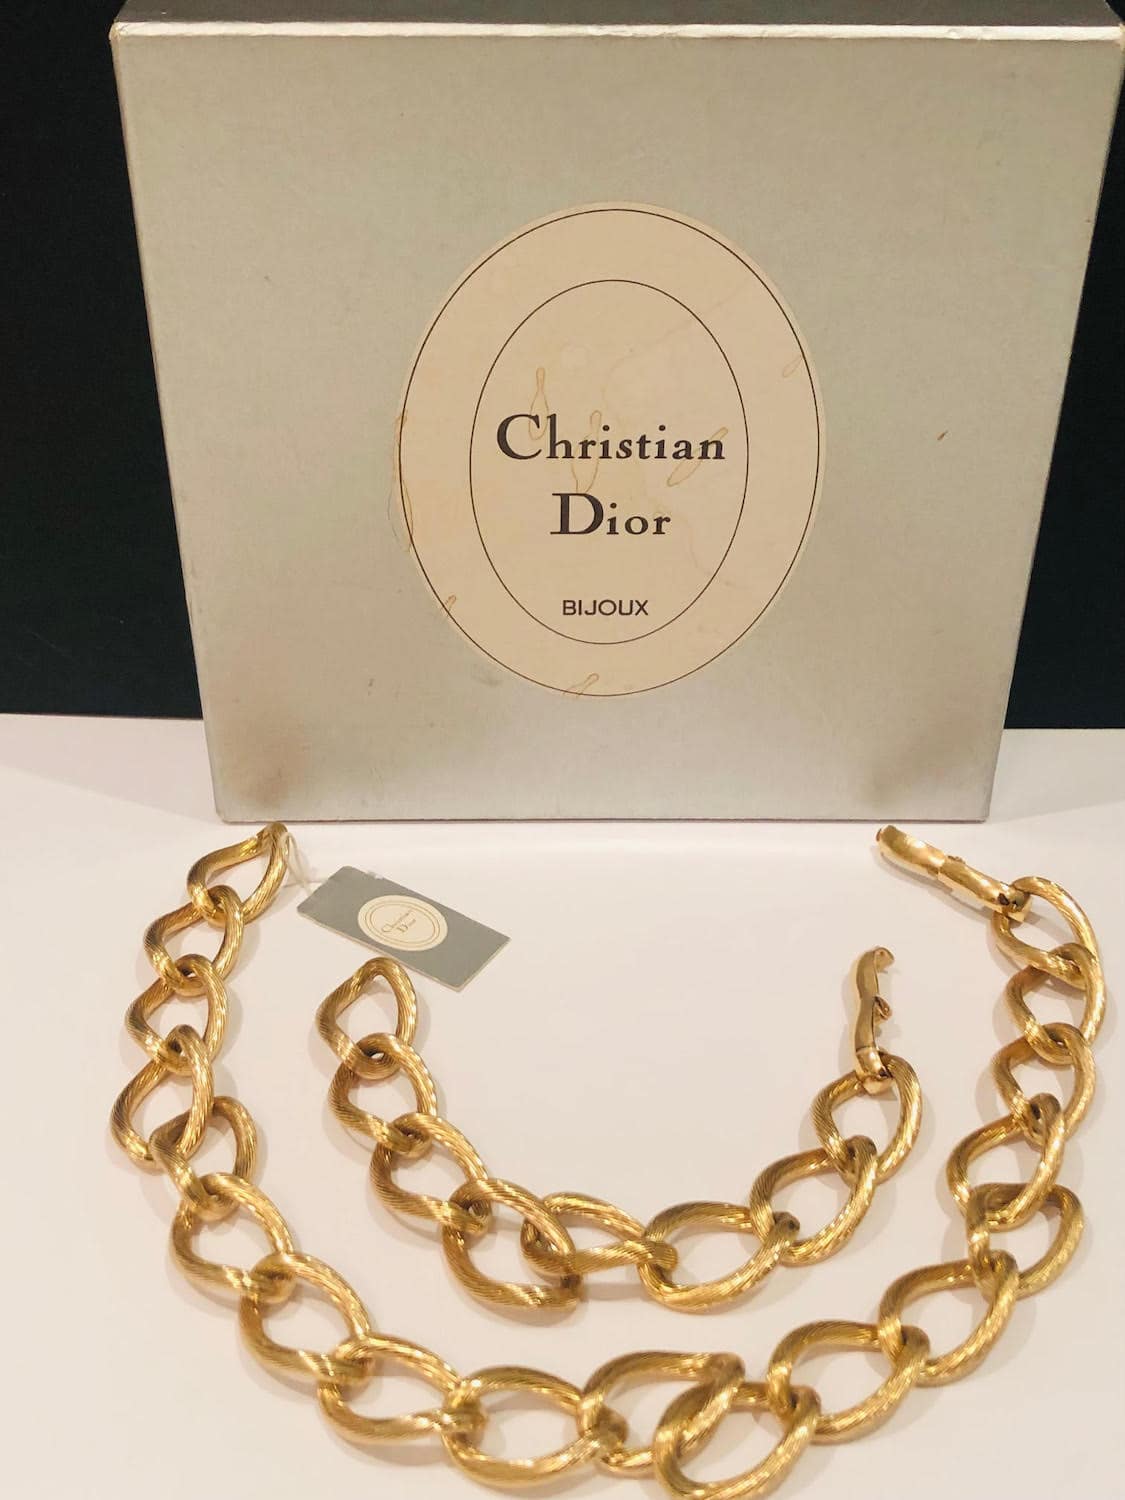 Sold at Auction Vintage Micro Mosaic Christian Dior Jewelry